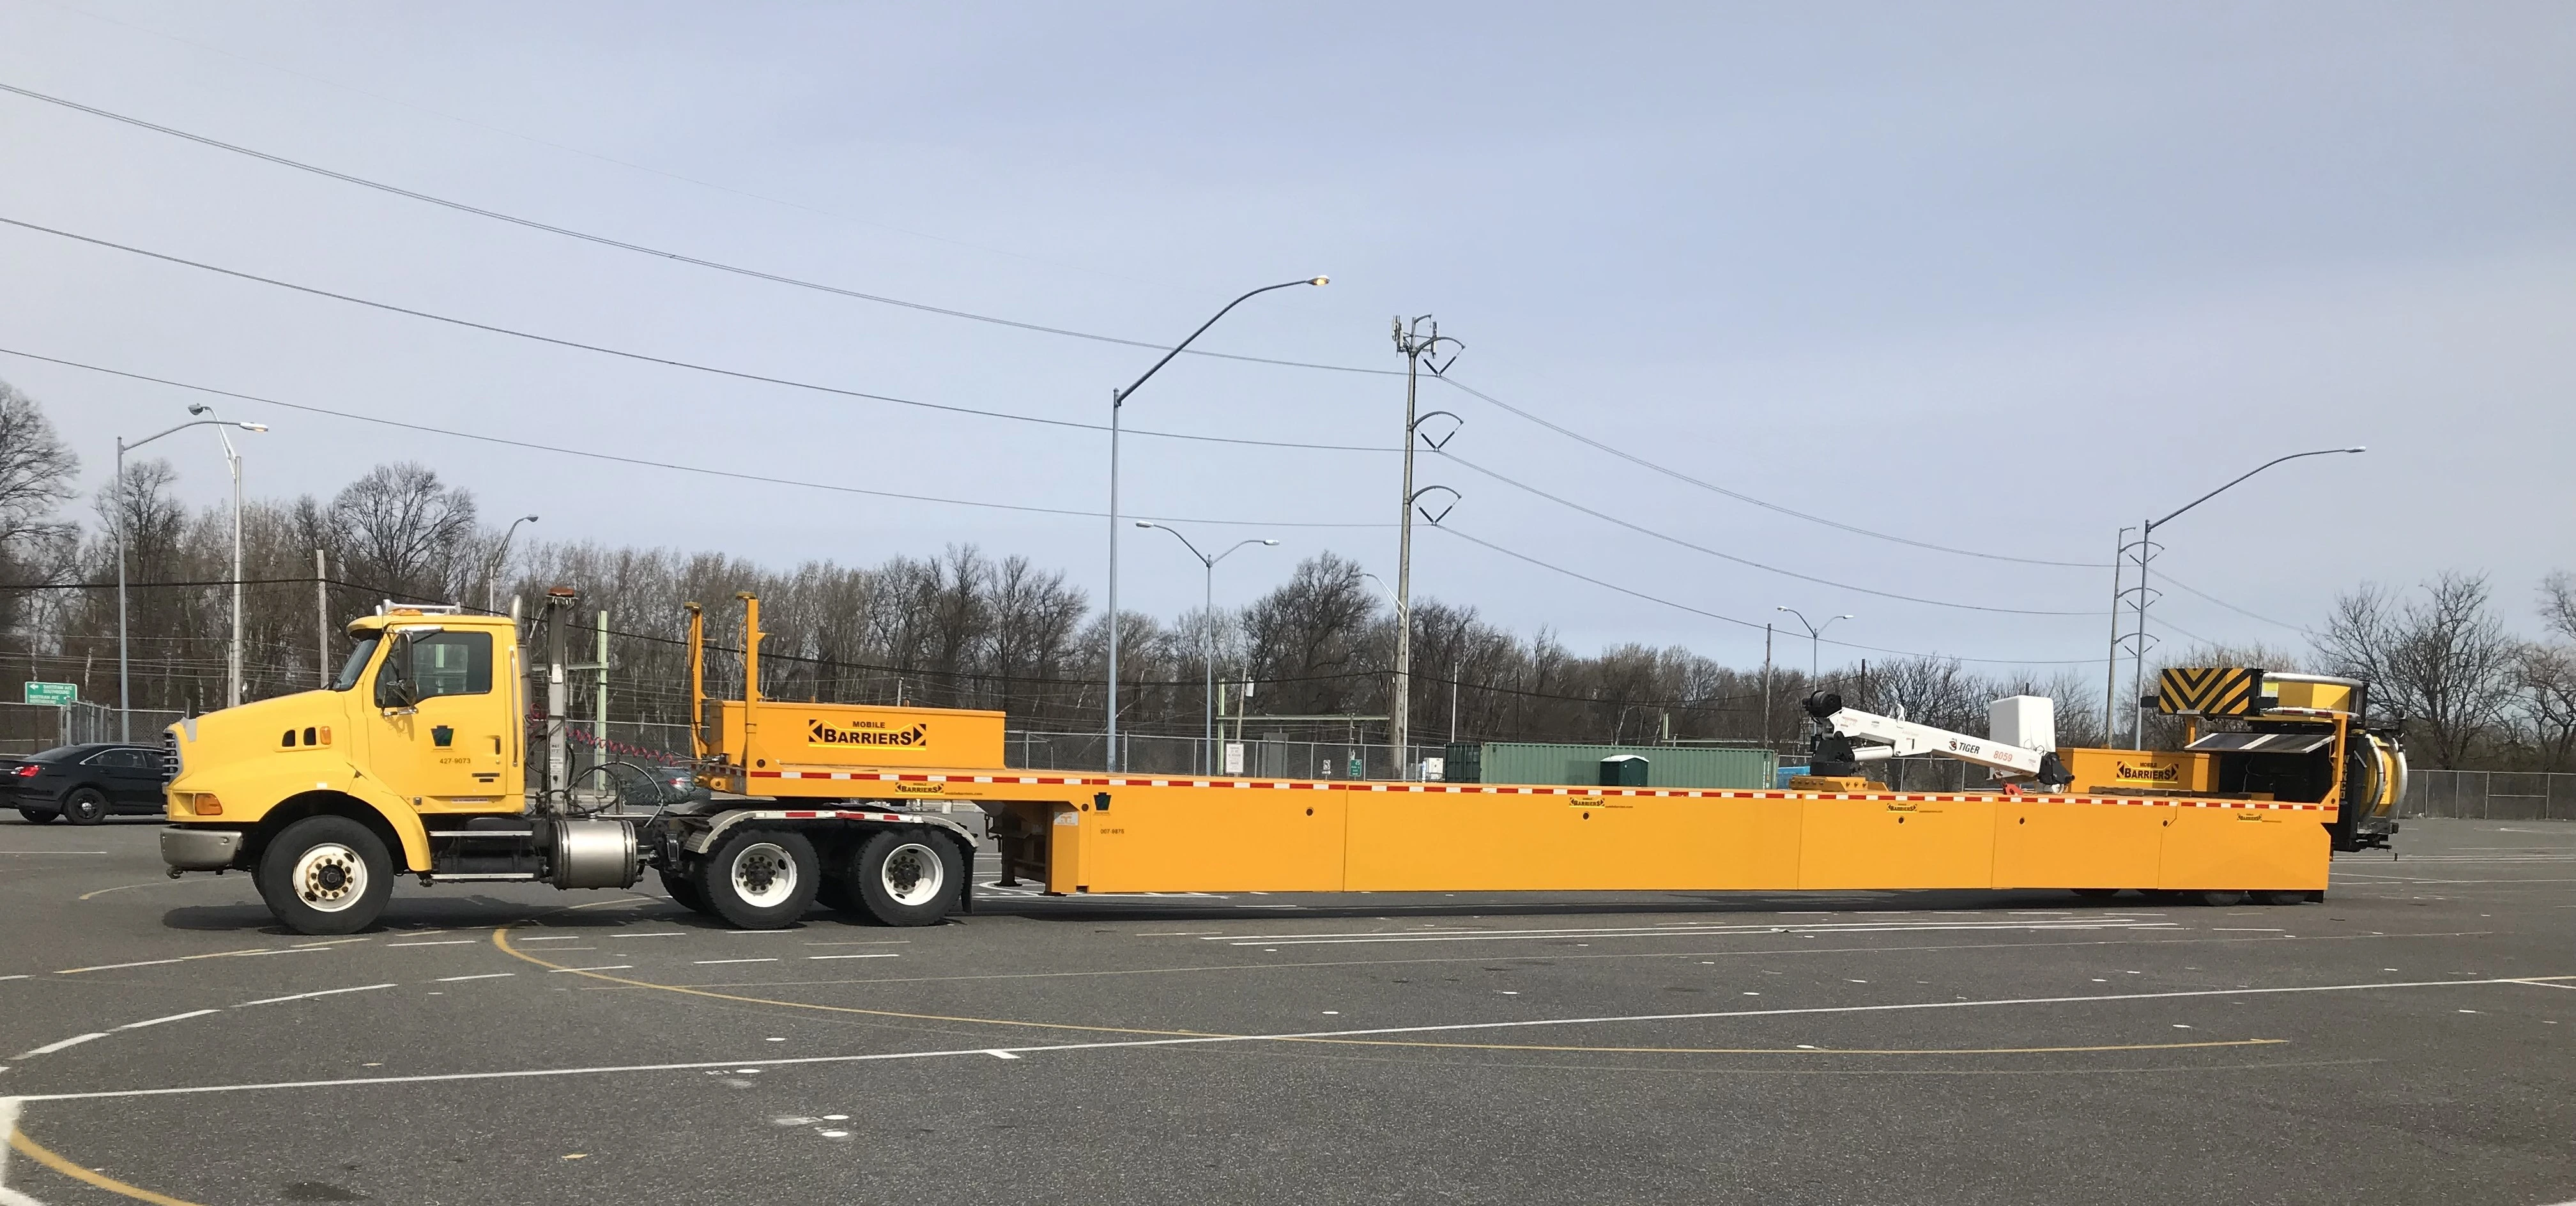 An image of a 110-foot-long yellow mobile truck barrier sitting in a parking lot.